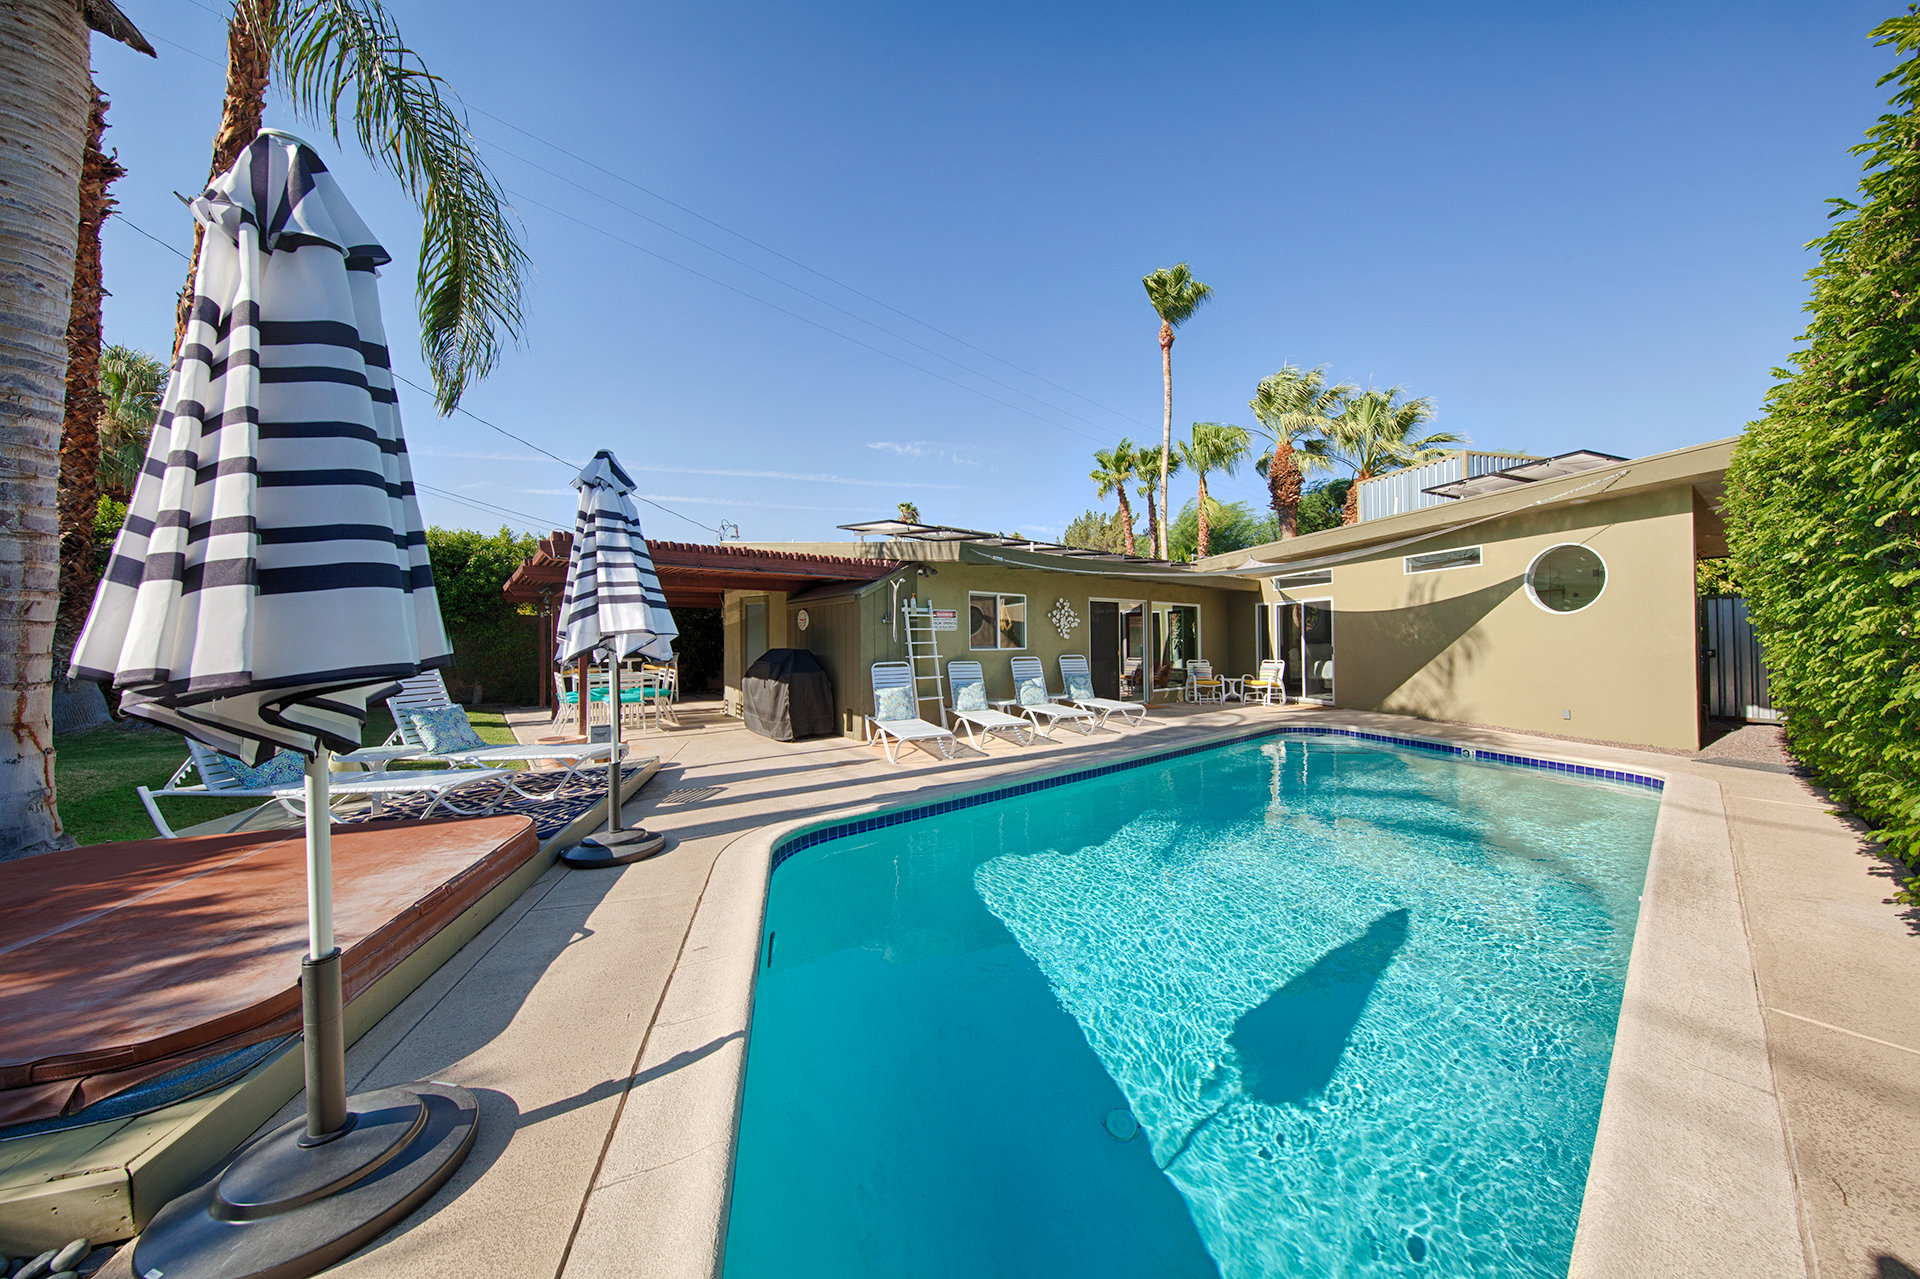 The pool of a mid-century modern home in Movie Colony East